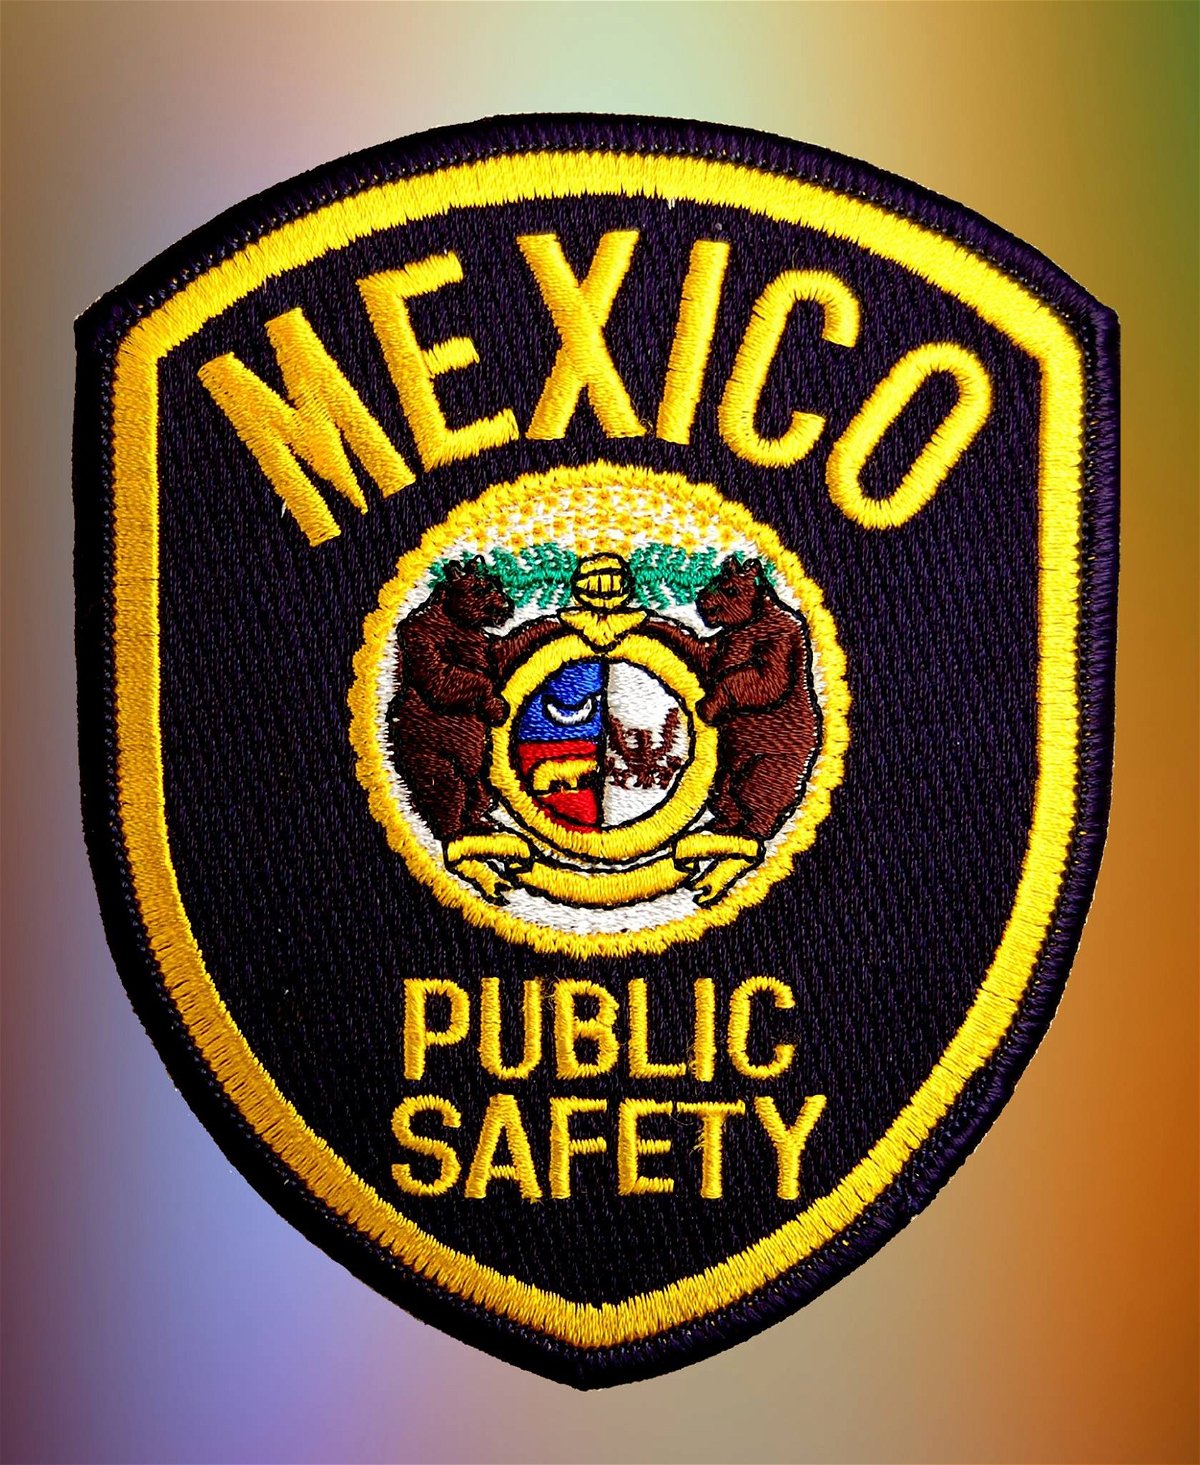 File photo of the Mexico Department of Public Safety logo